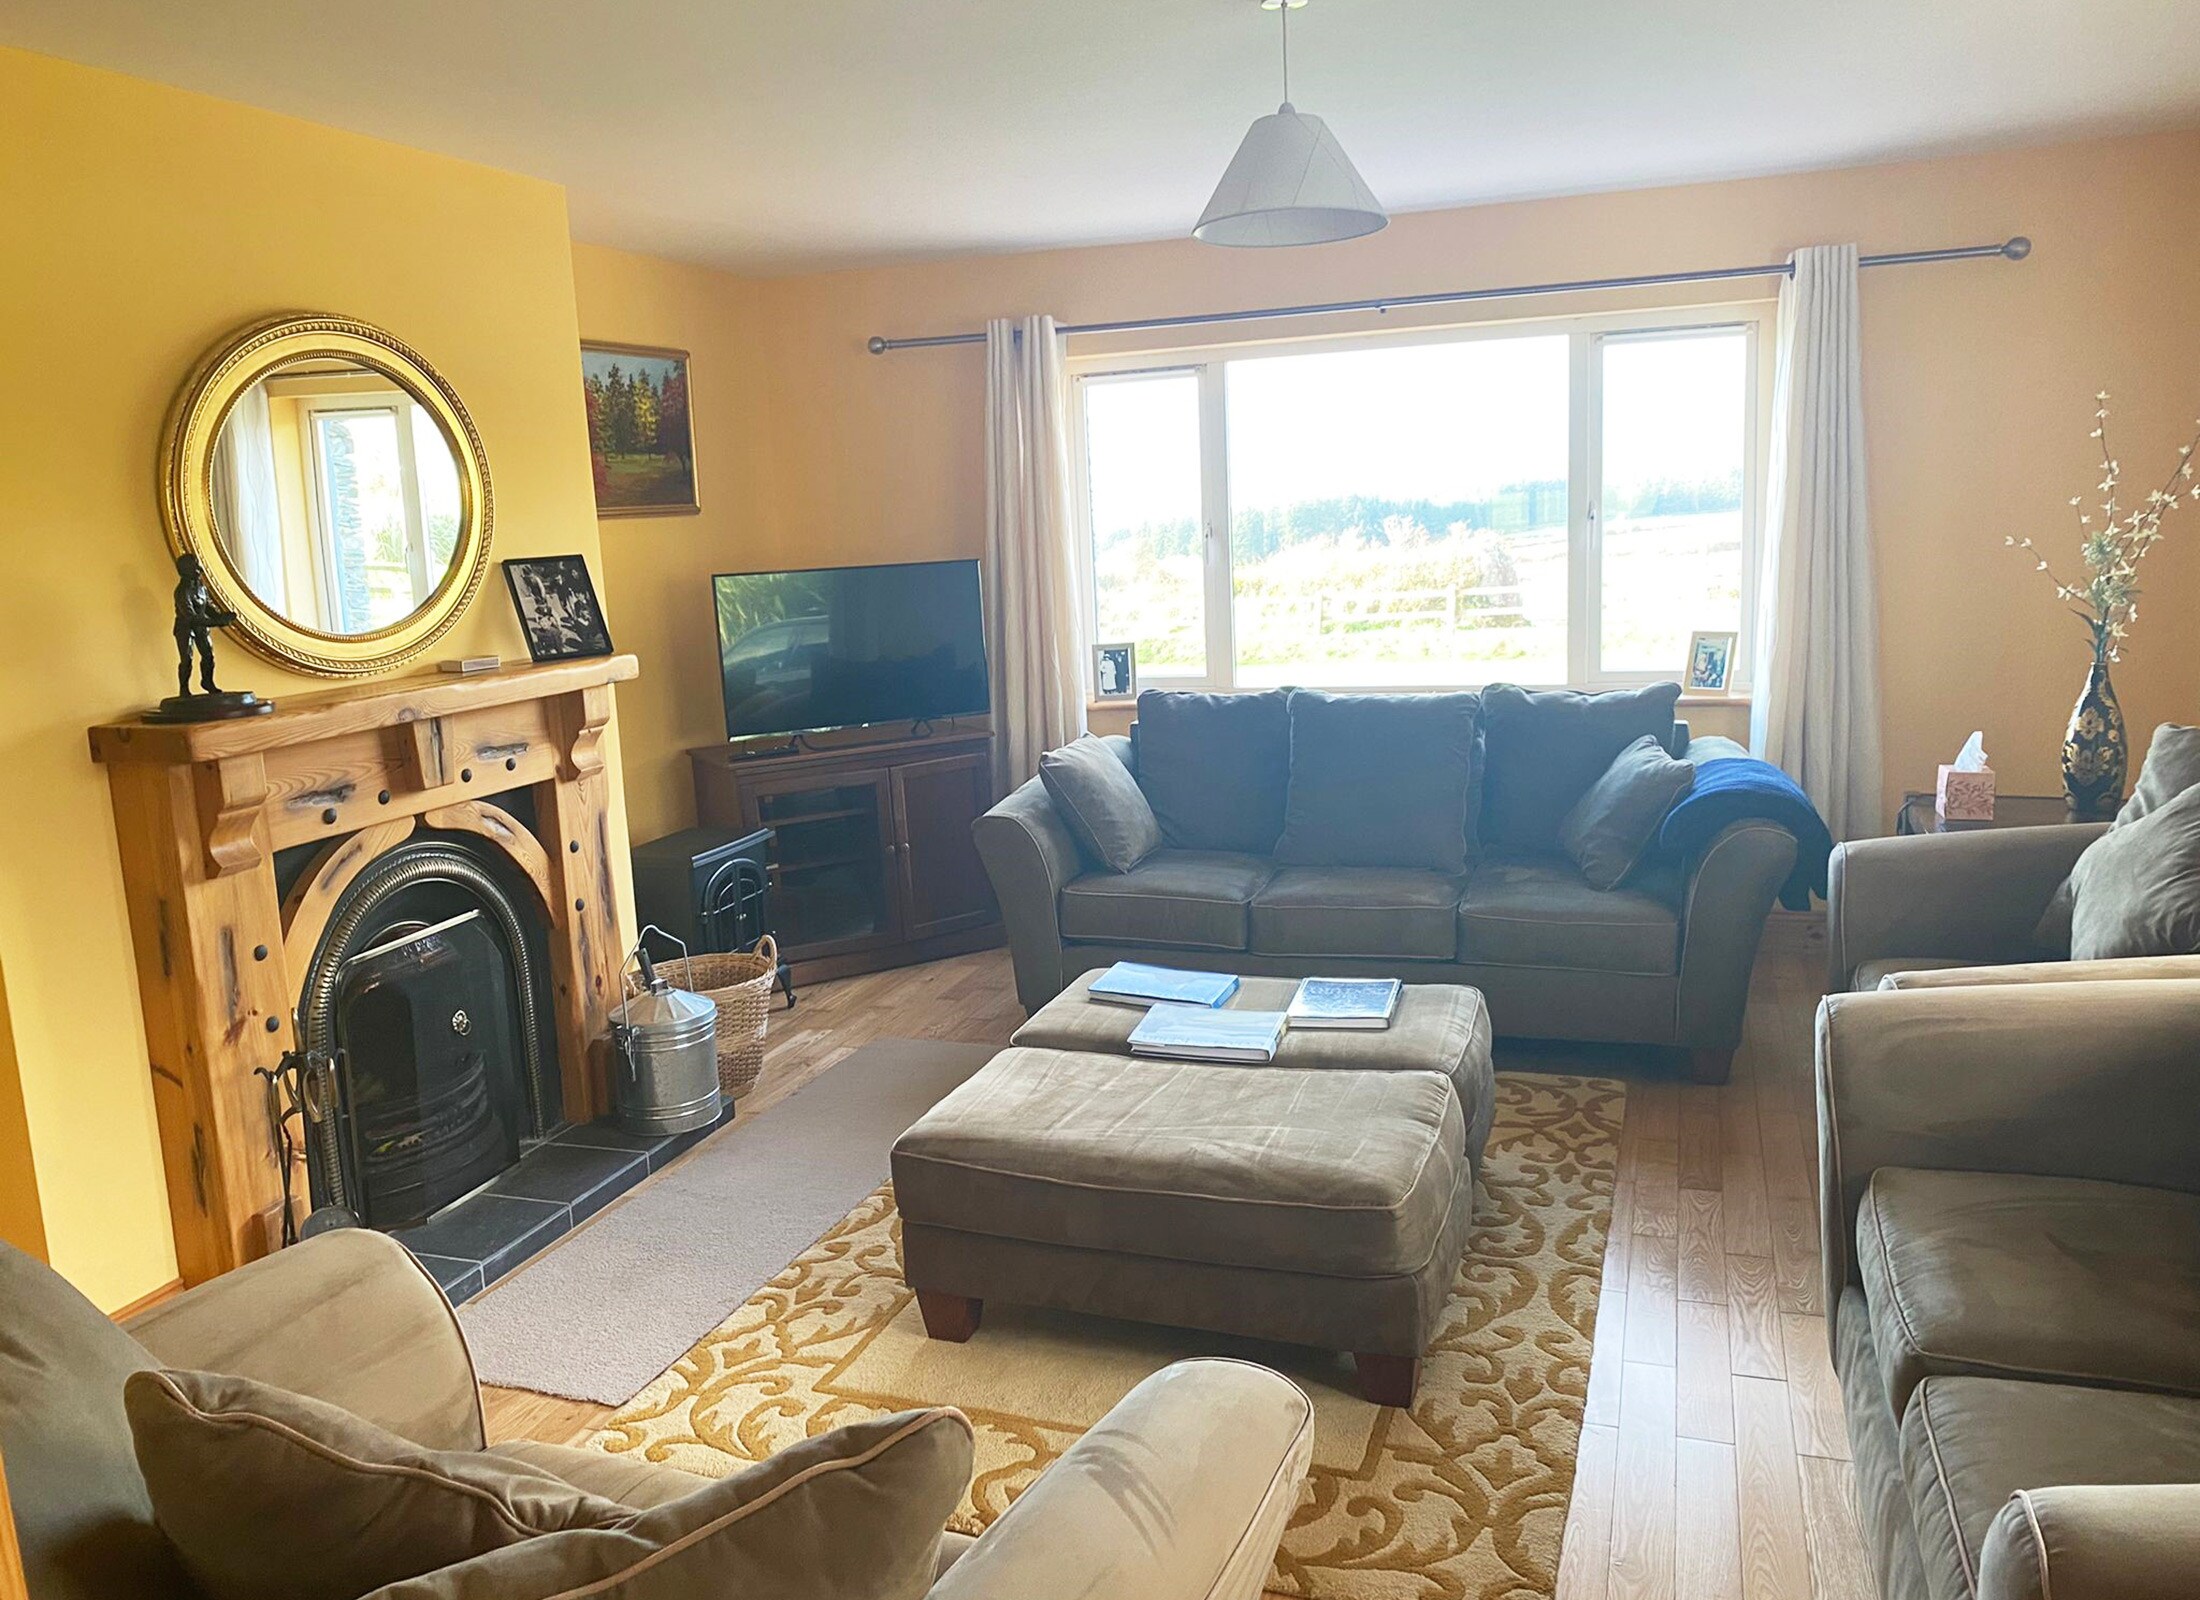 Valentia View Holiday Home, Coastal Holiday Accommodation Available near Caherciveen, County Kerry| Trident Holiday Homes | Read More and Book Online Today